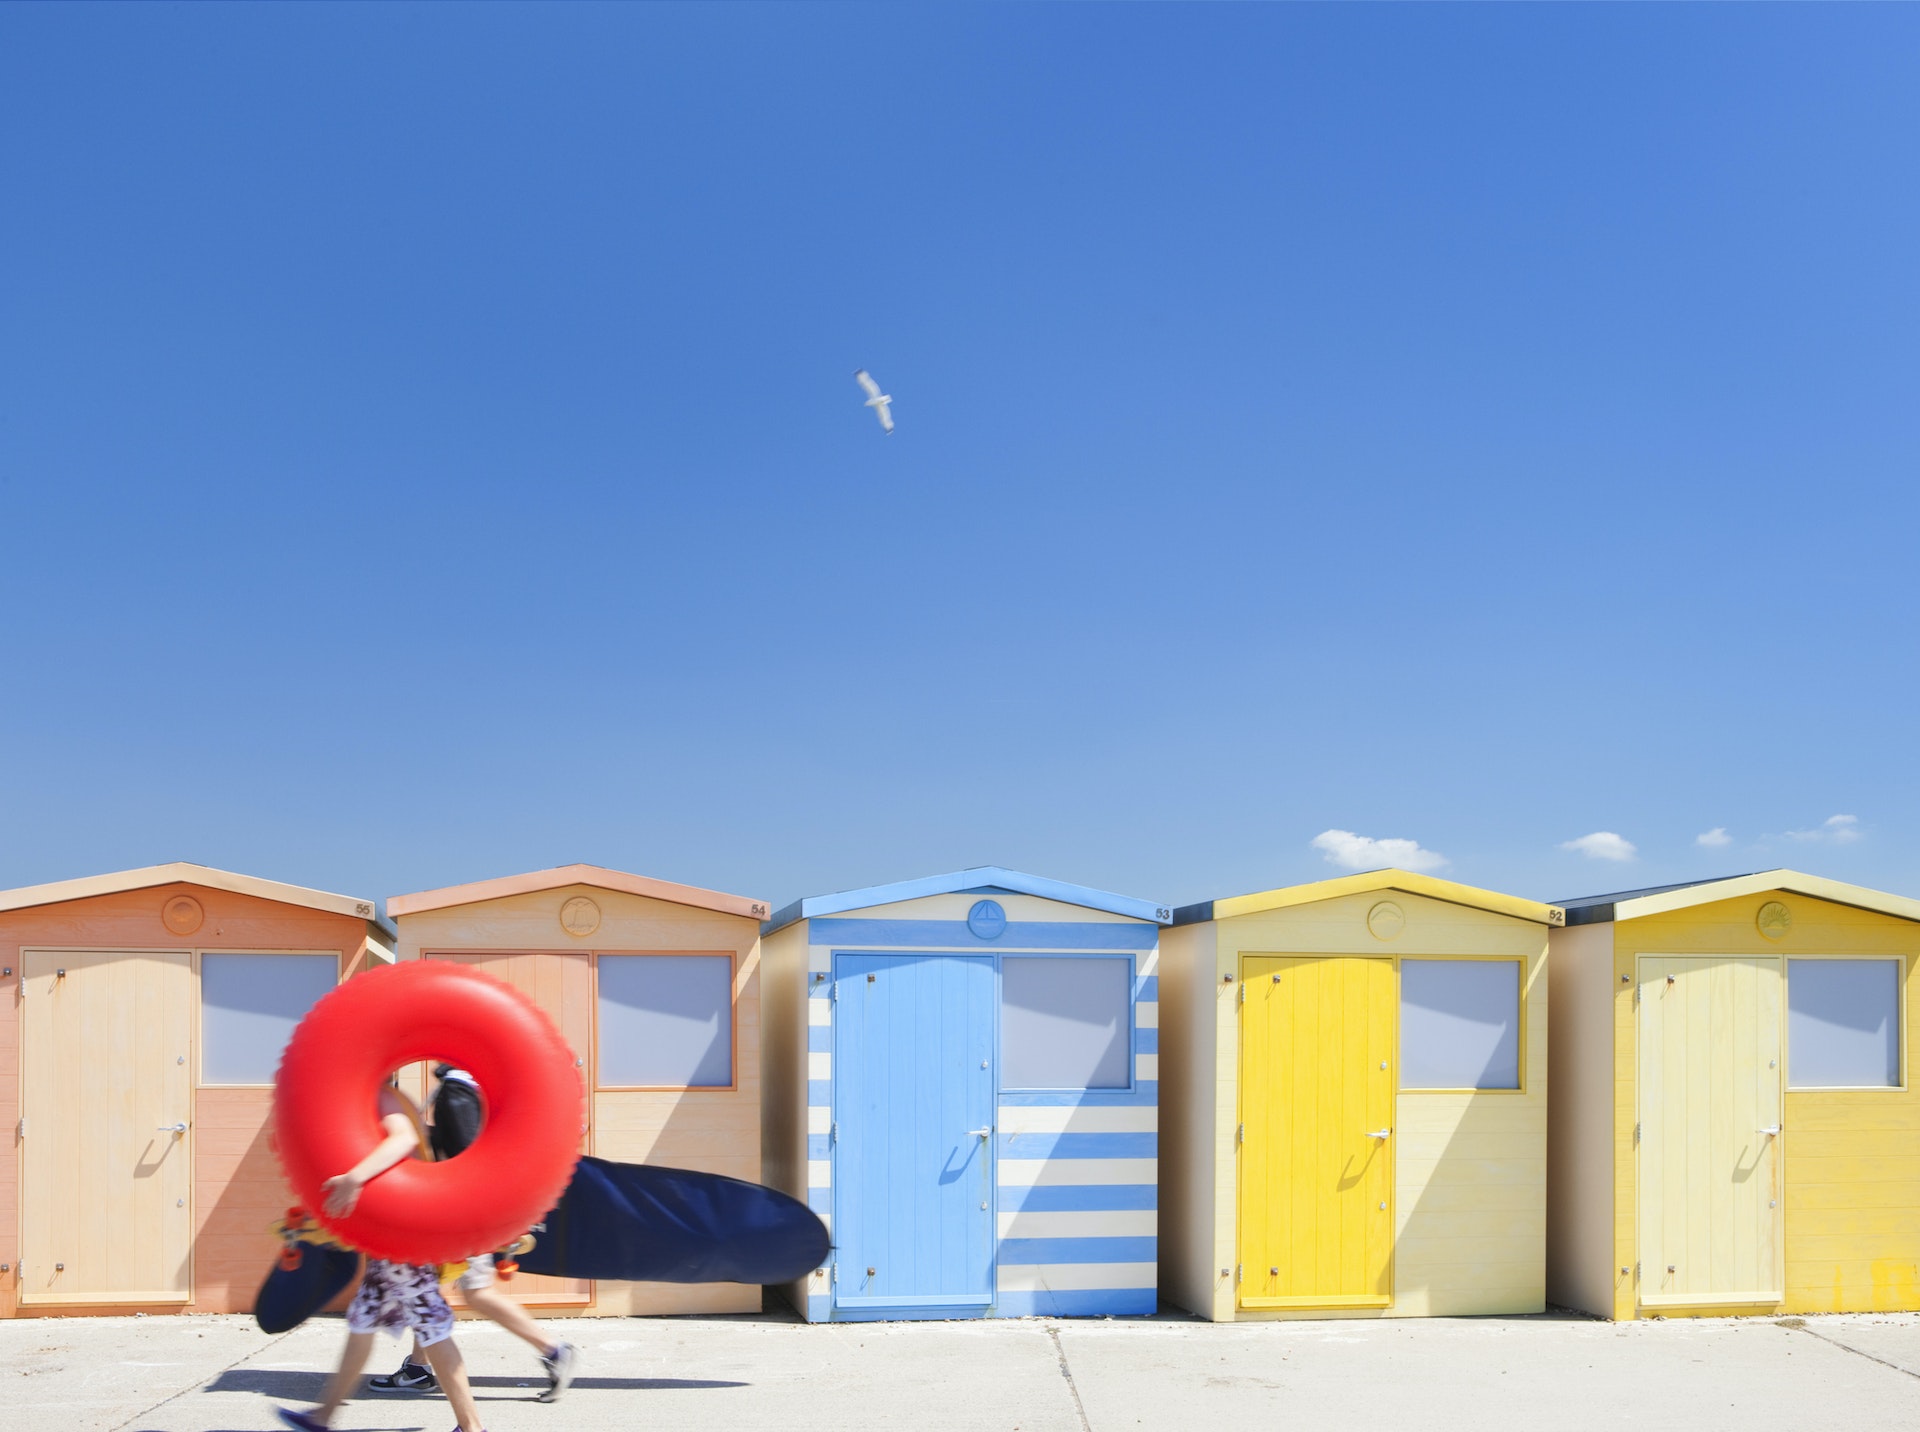 People carrying inflatables walk past colorful beach huts on the English coast